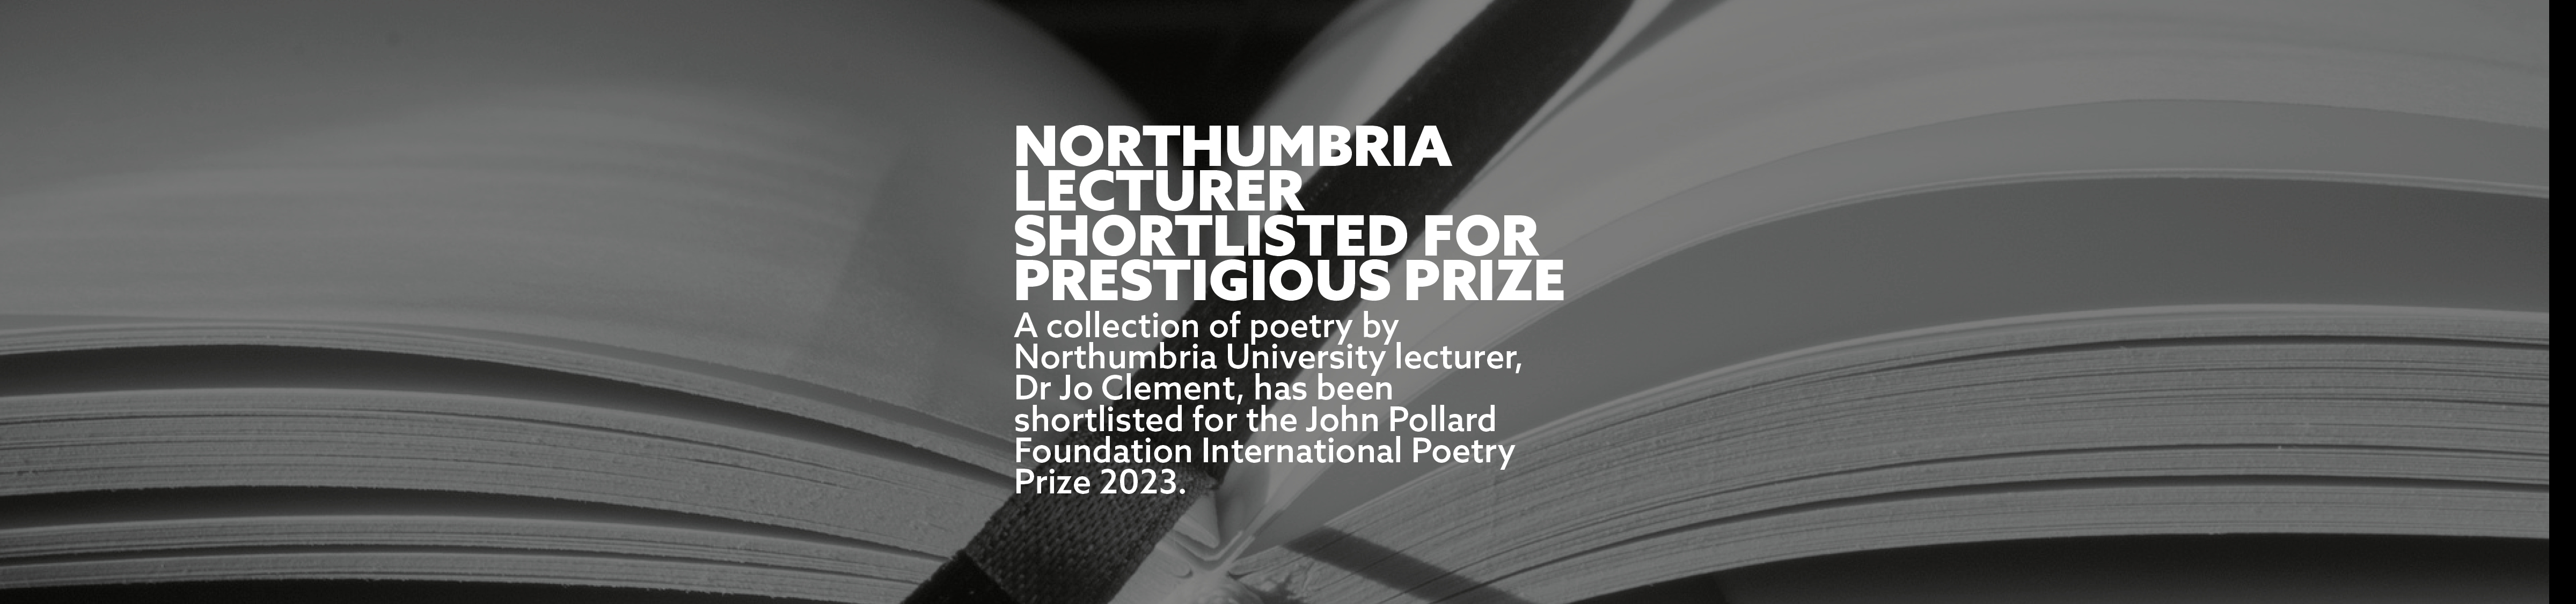 Northumbria lecturer shortlisted for prestigious prize